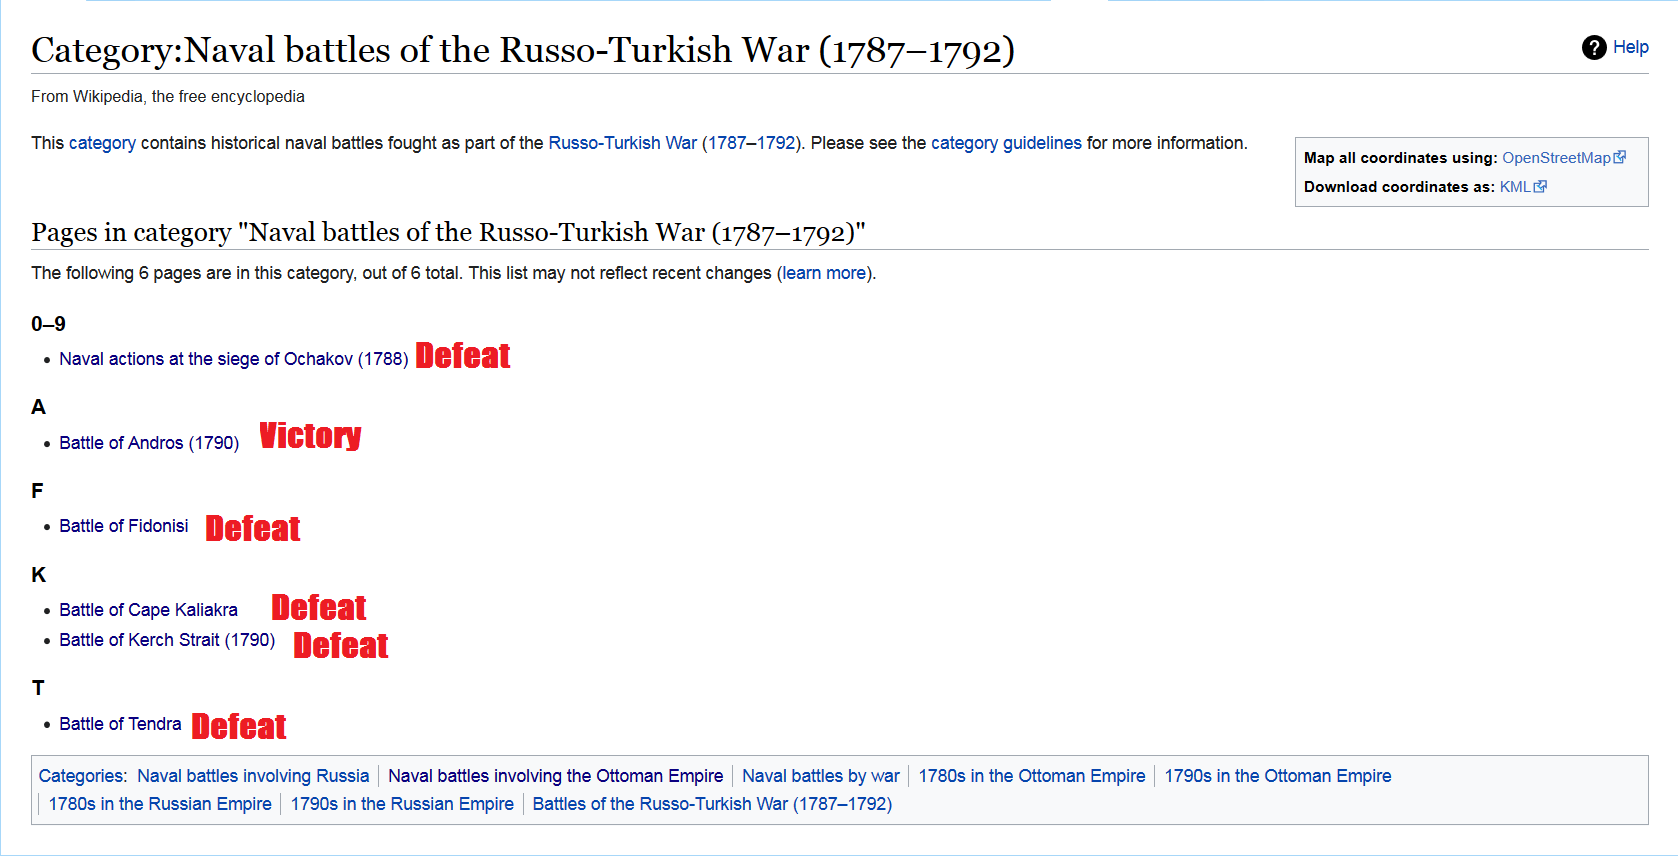 Screenshot_2021-11-12 Category Naval battles of the Russo-Turkish War (1787–1792) - Wikipedia.png